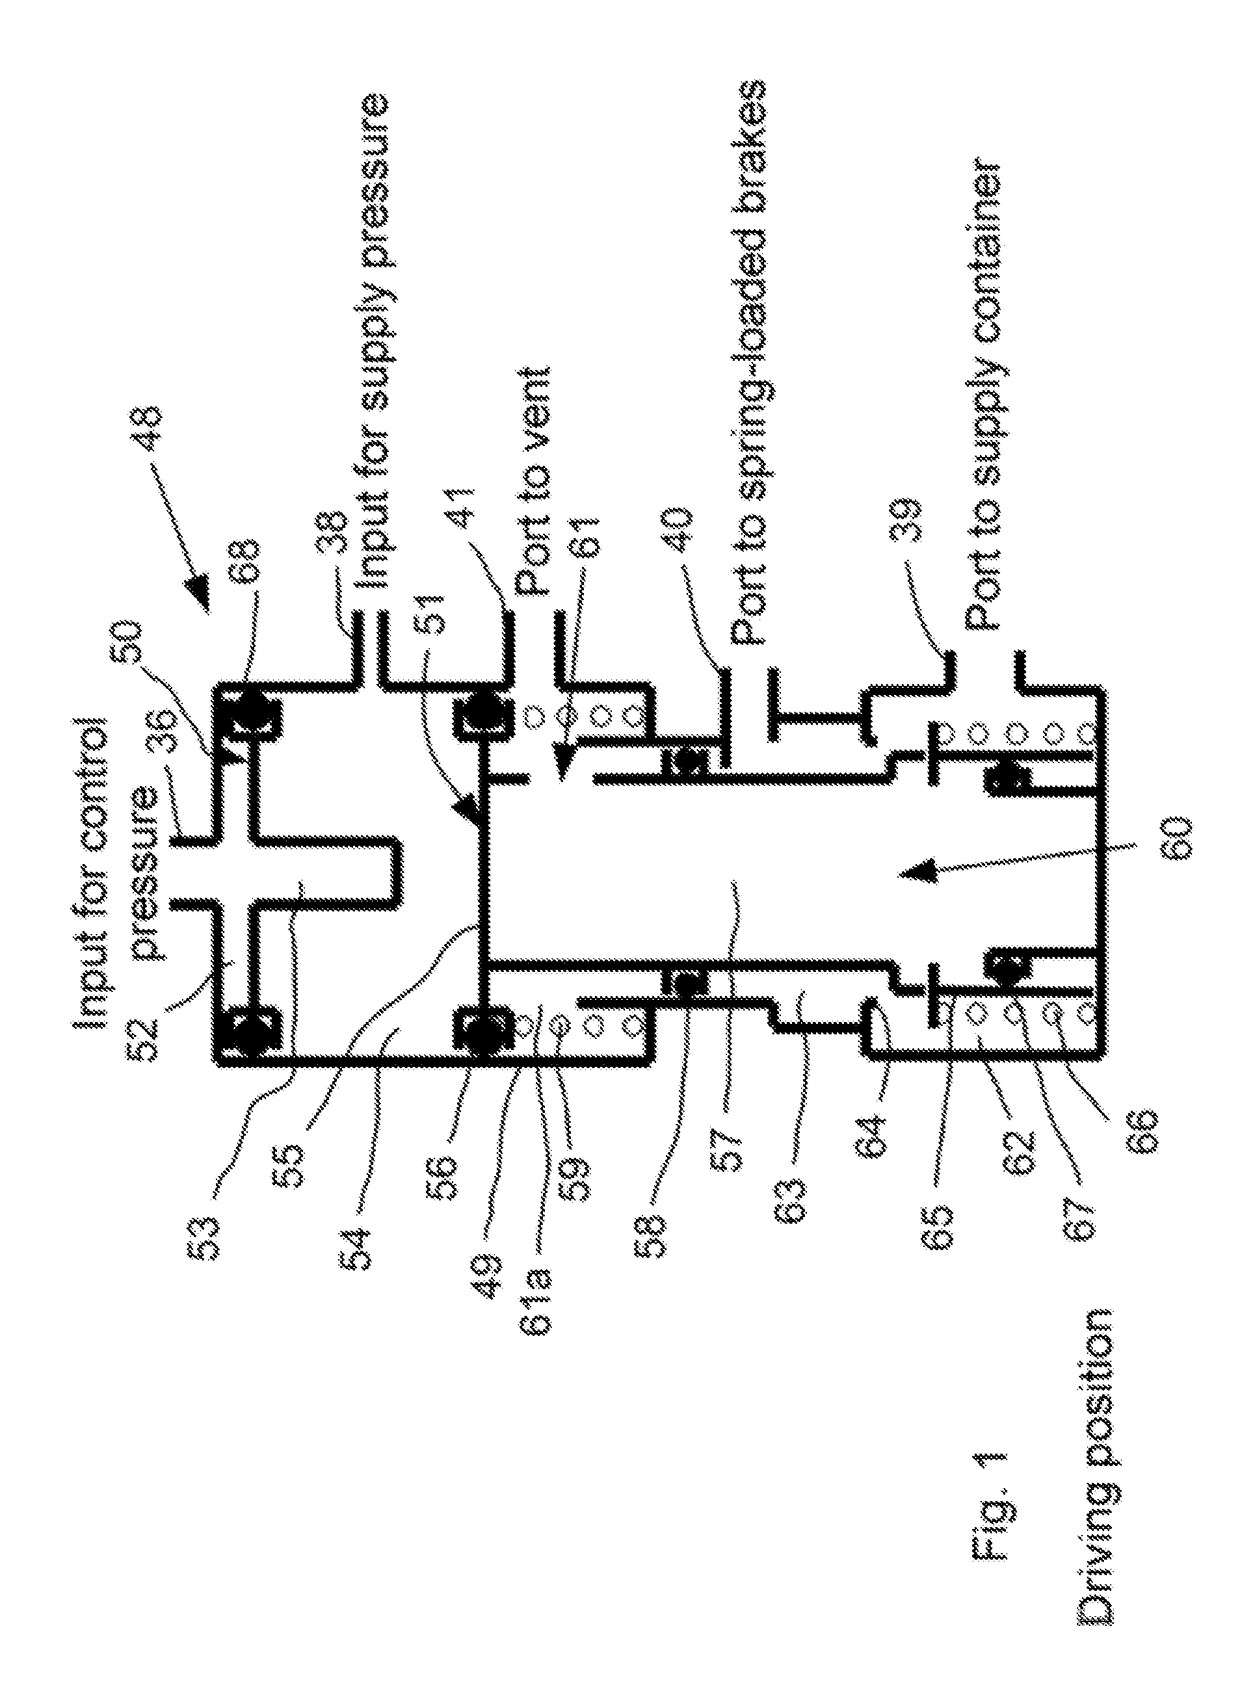 Method for controlling brakes in a trailer vehicle